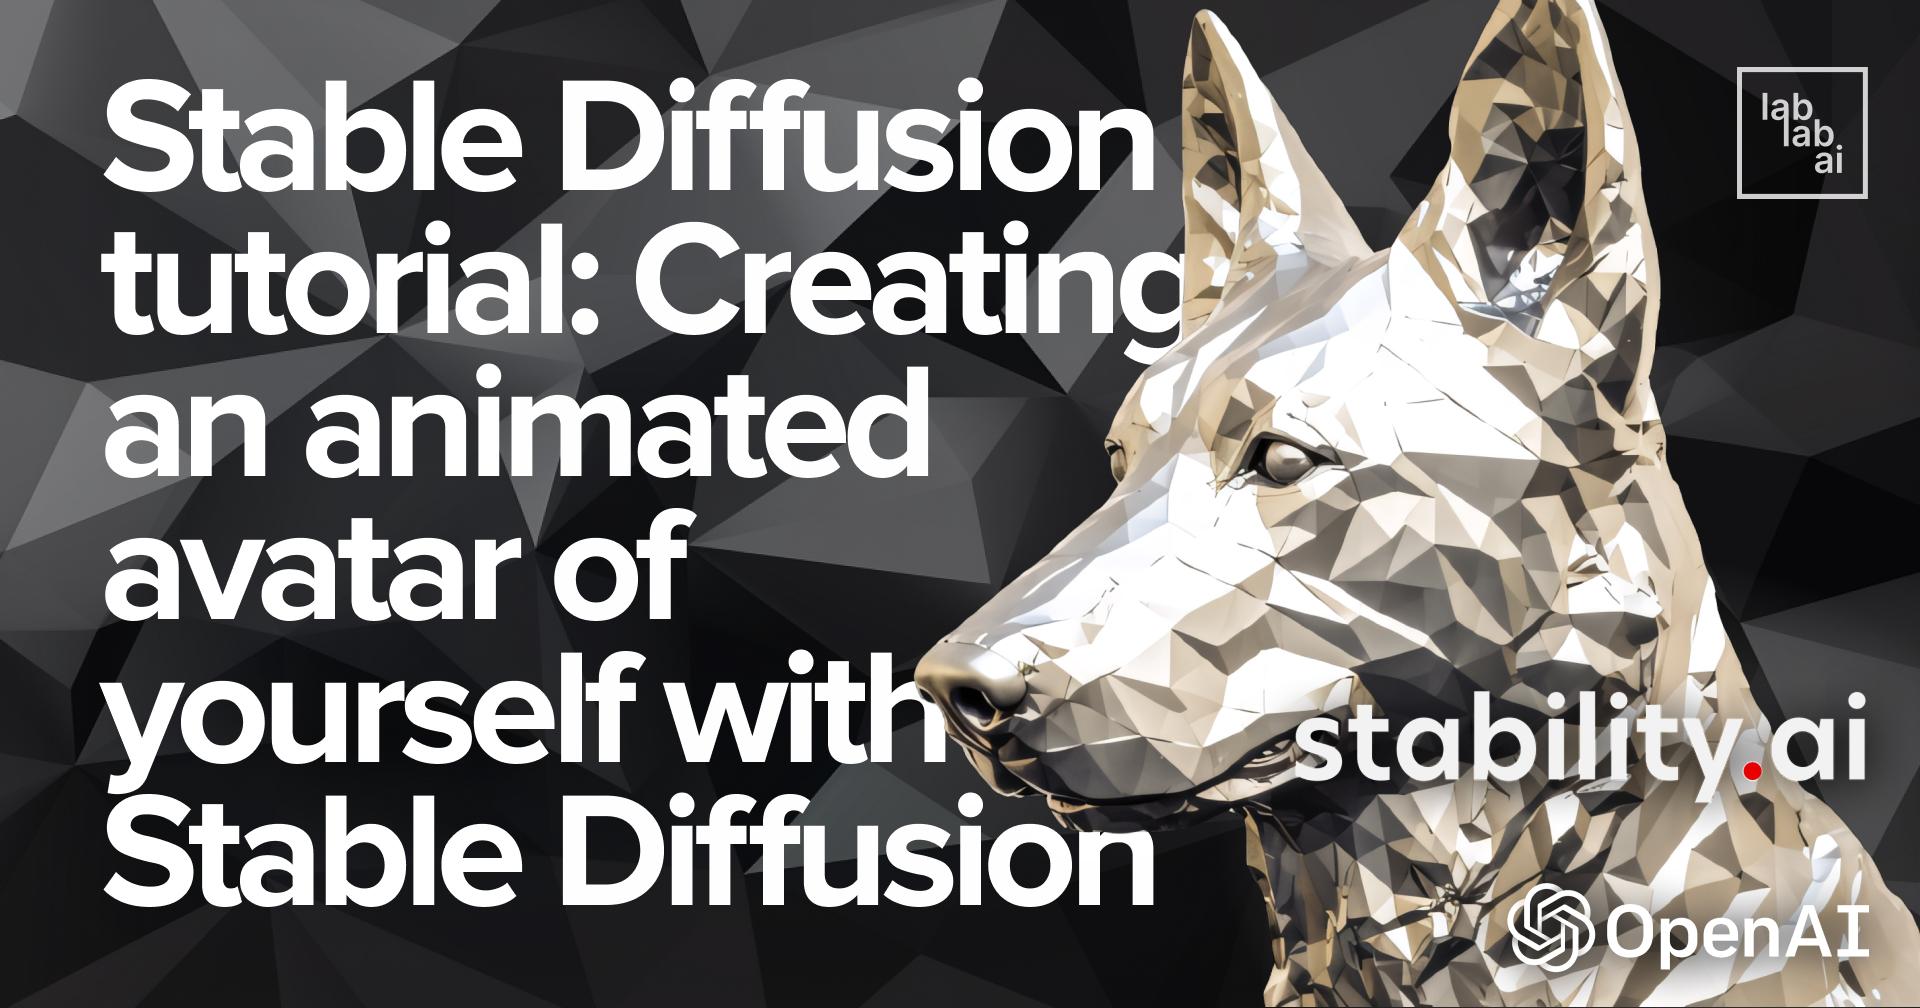 Stable Diffusion tutorial: Creating an animated avatar of yourself with Stable Diffusion